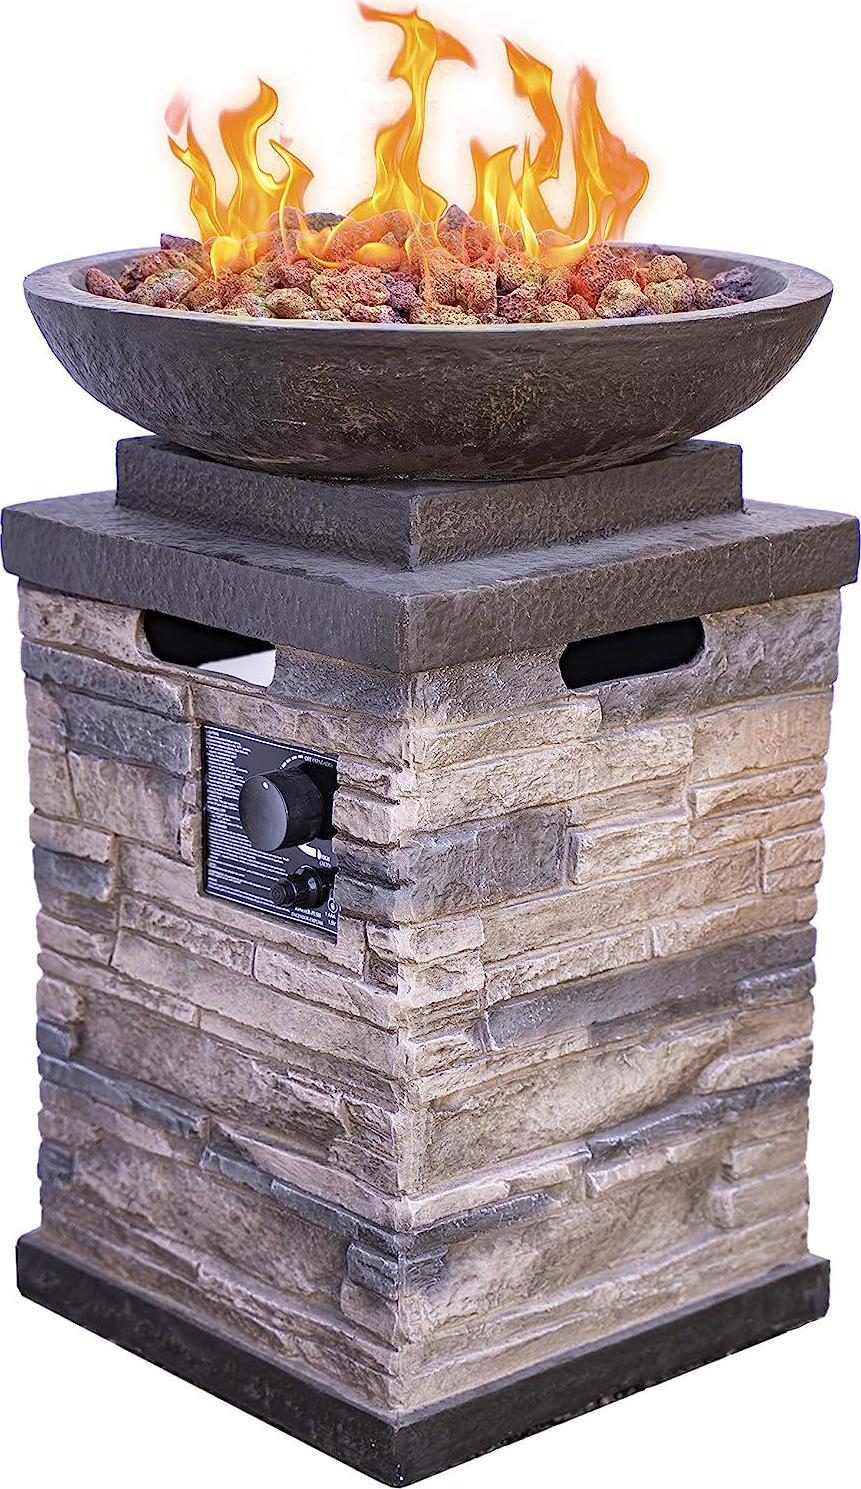 63172 Newcastle Propane Firebowl Column Realistic Look Firepit Heater Lava Rock 40,000 BTU Outdoor Gas Fire Pit 20 lb, Pack of 1, Natural Stone-